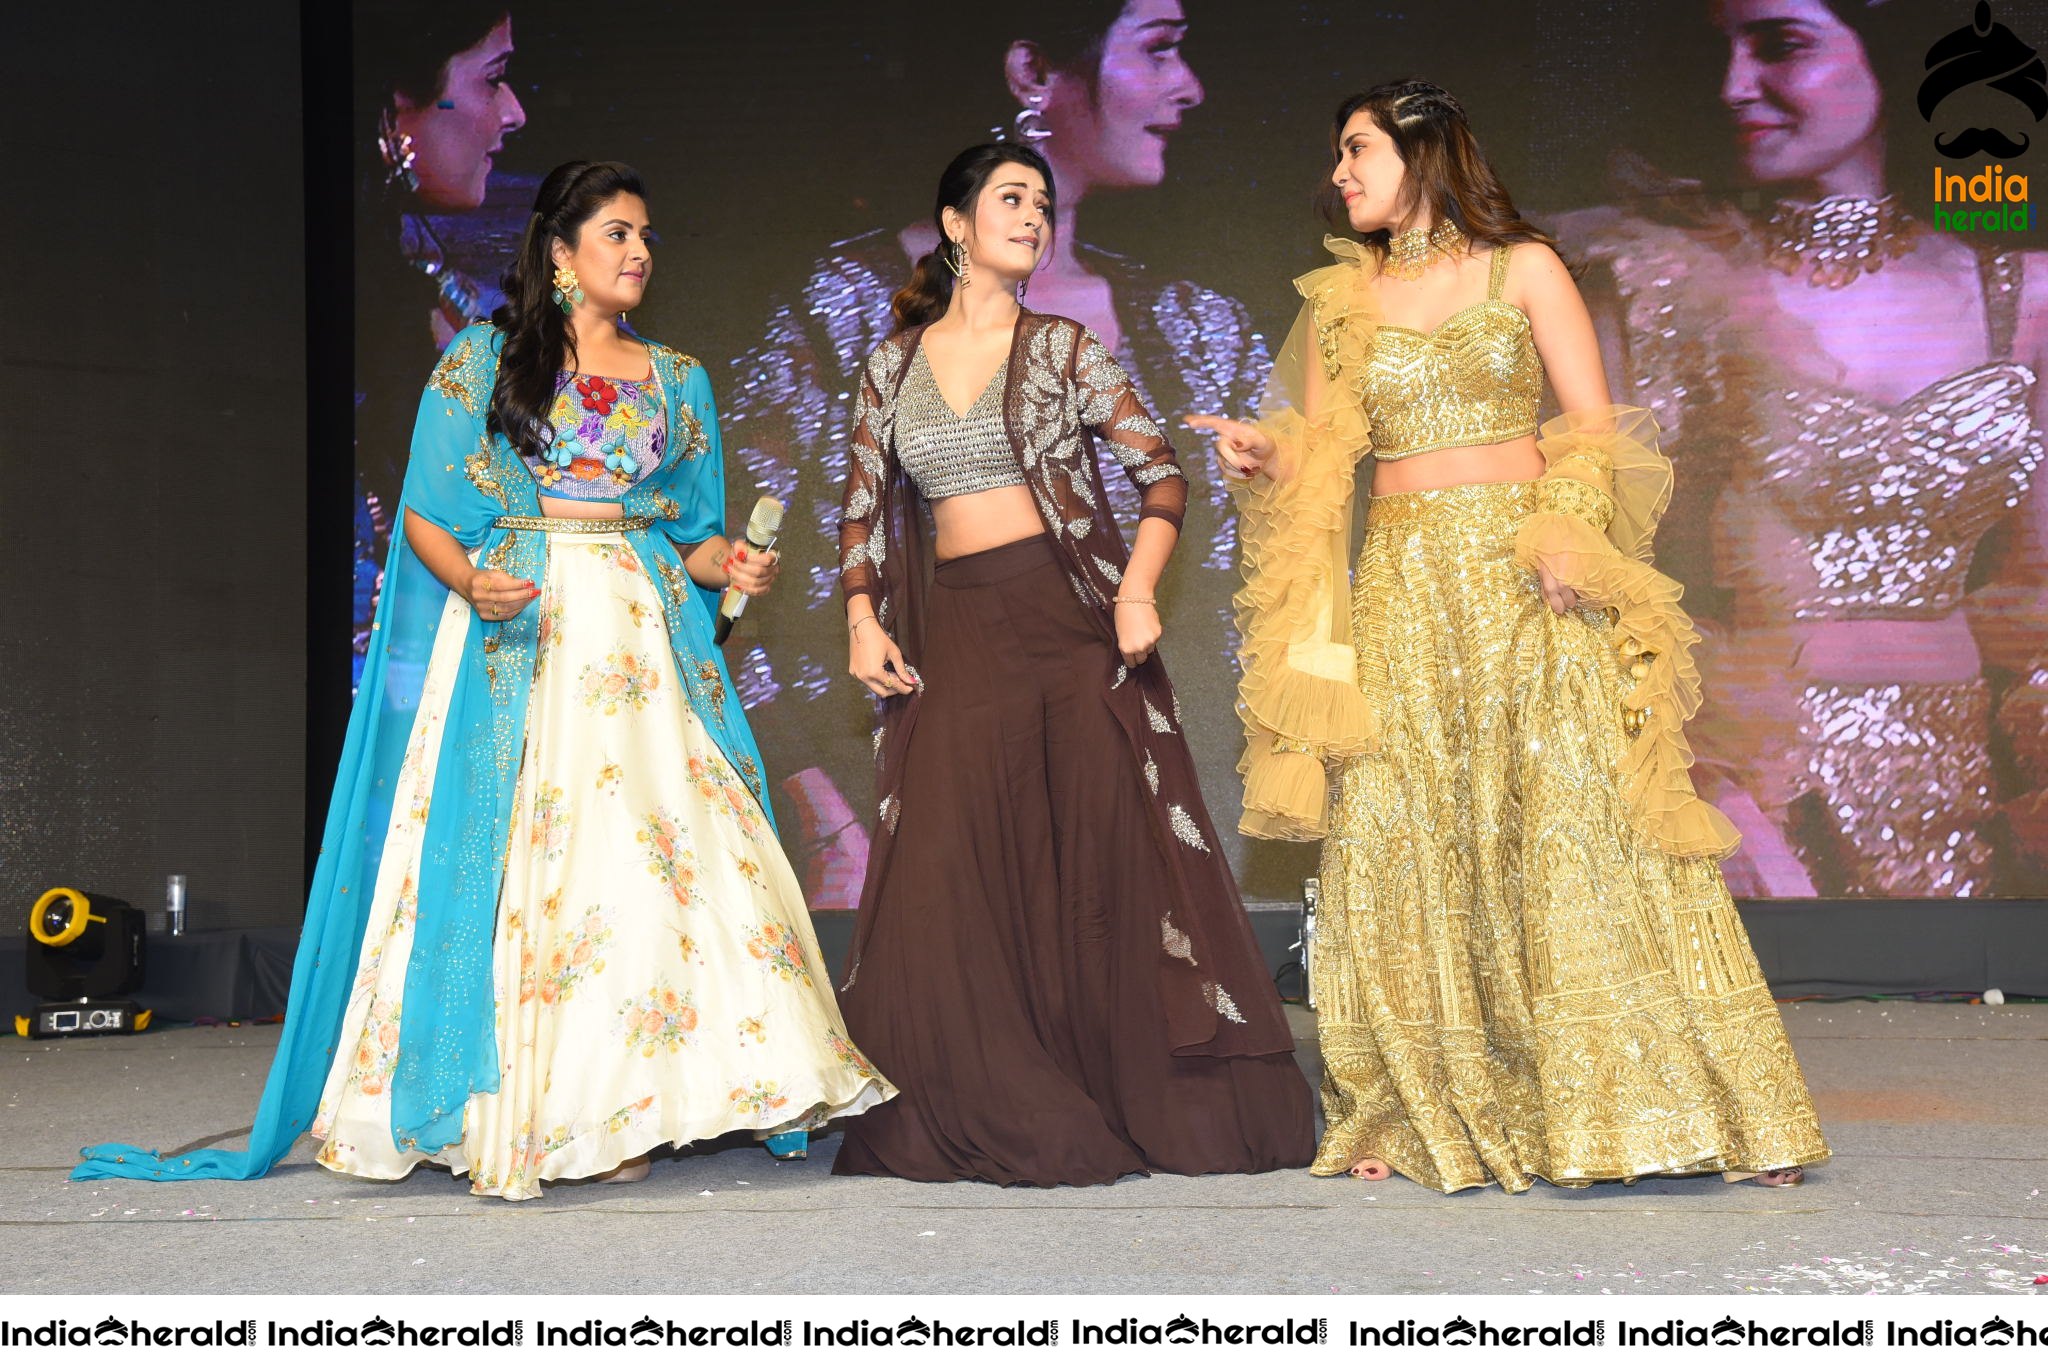 Sree Mukhi joins Payal and Raashi Khanna while dancing and setting stage on fire